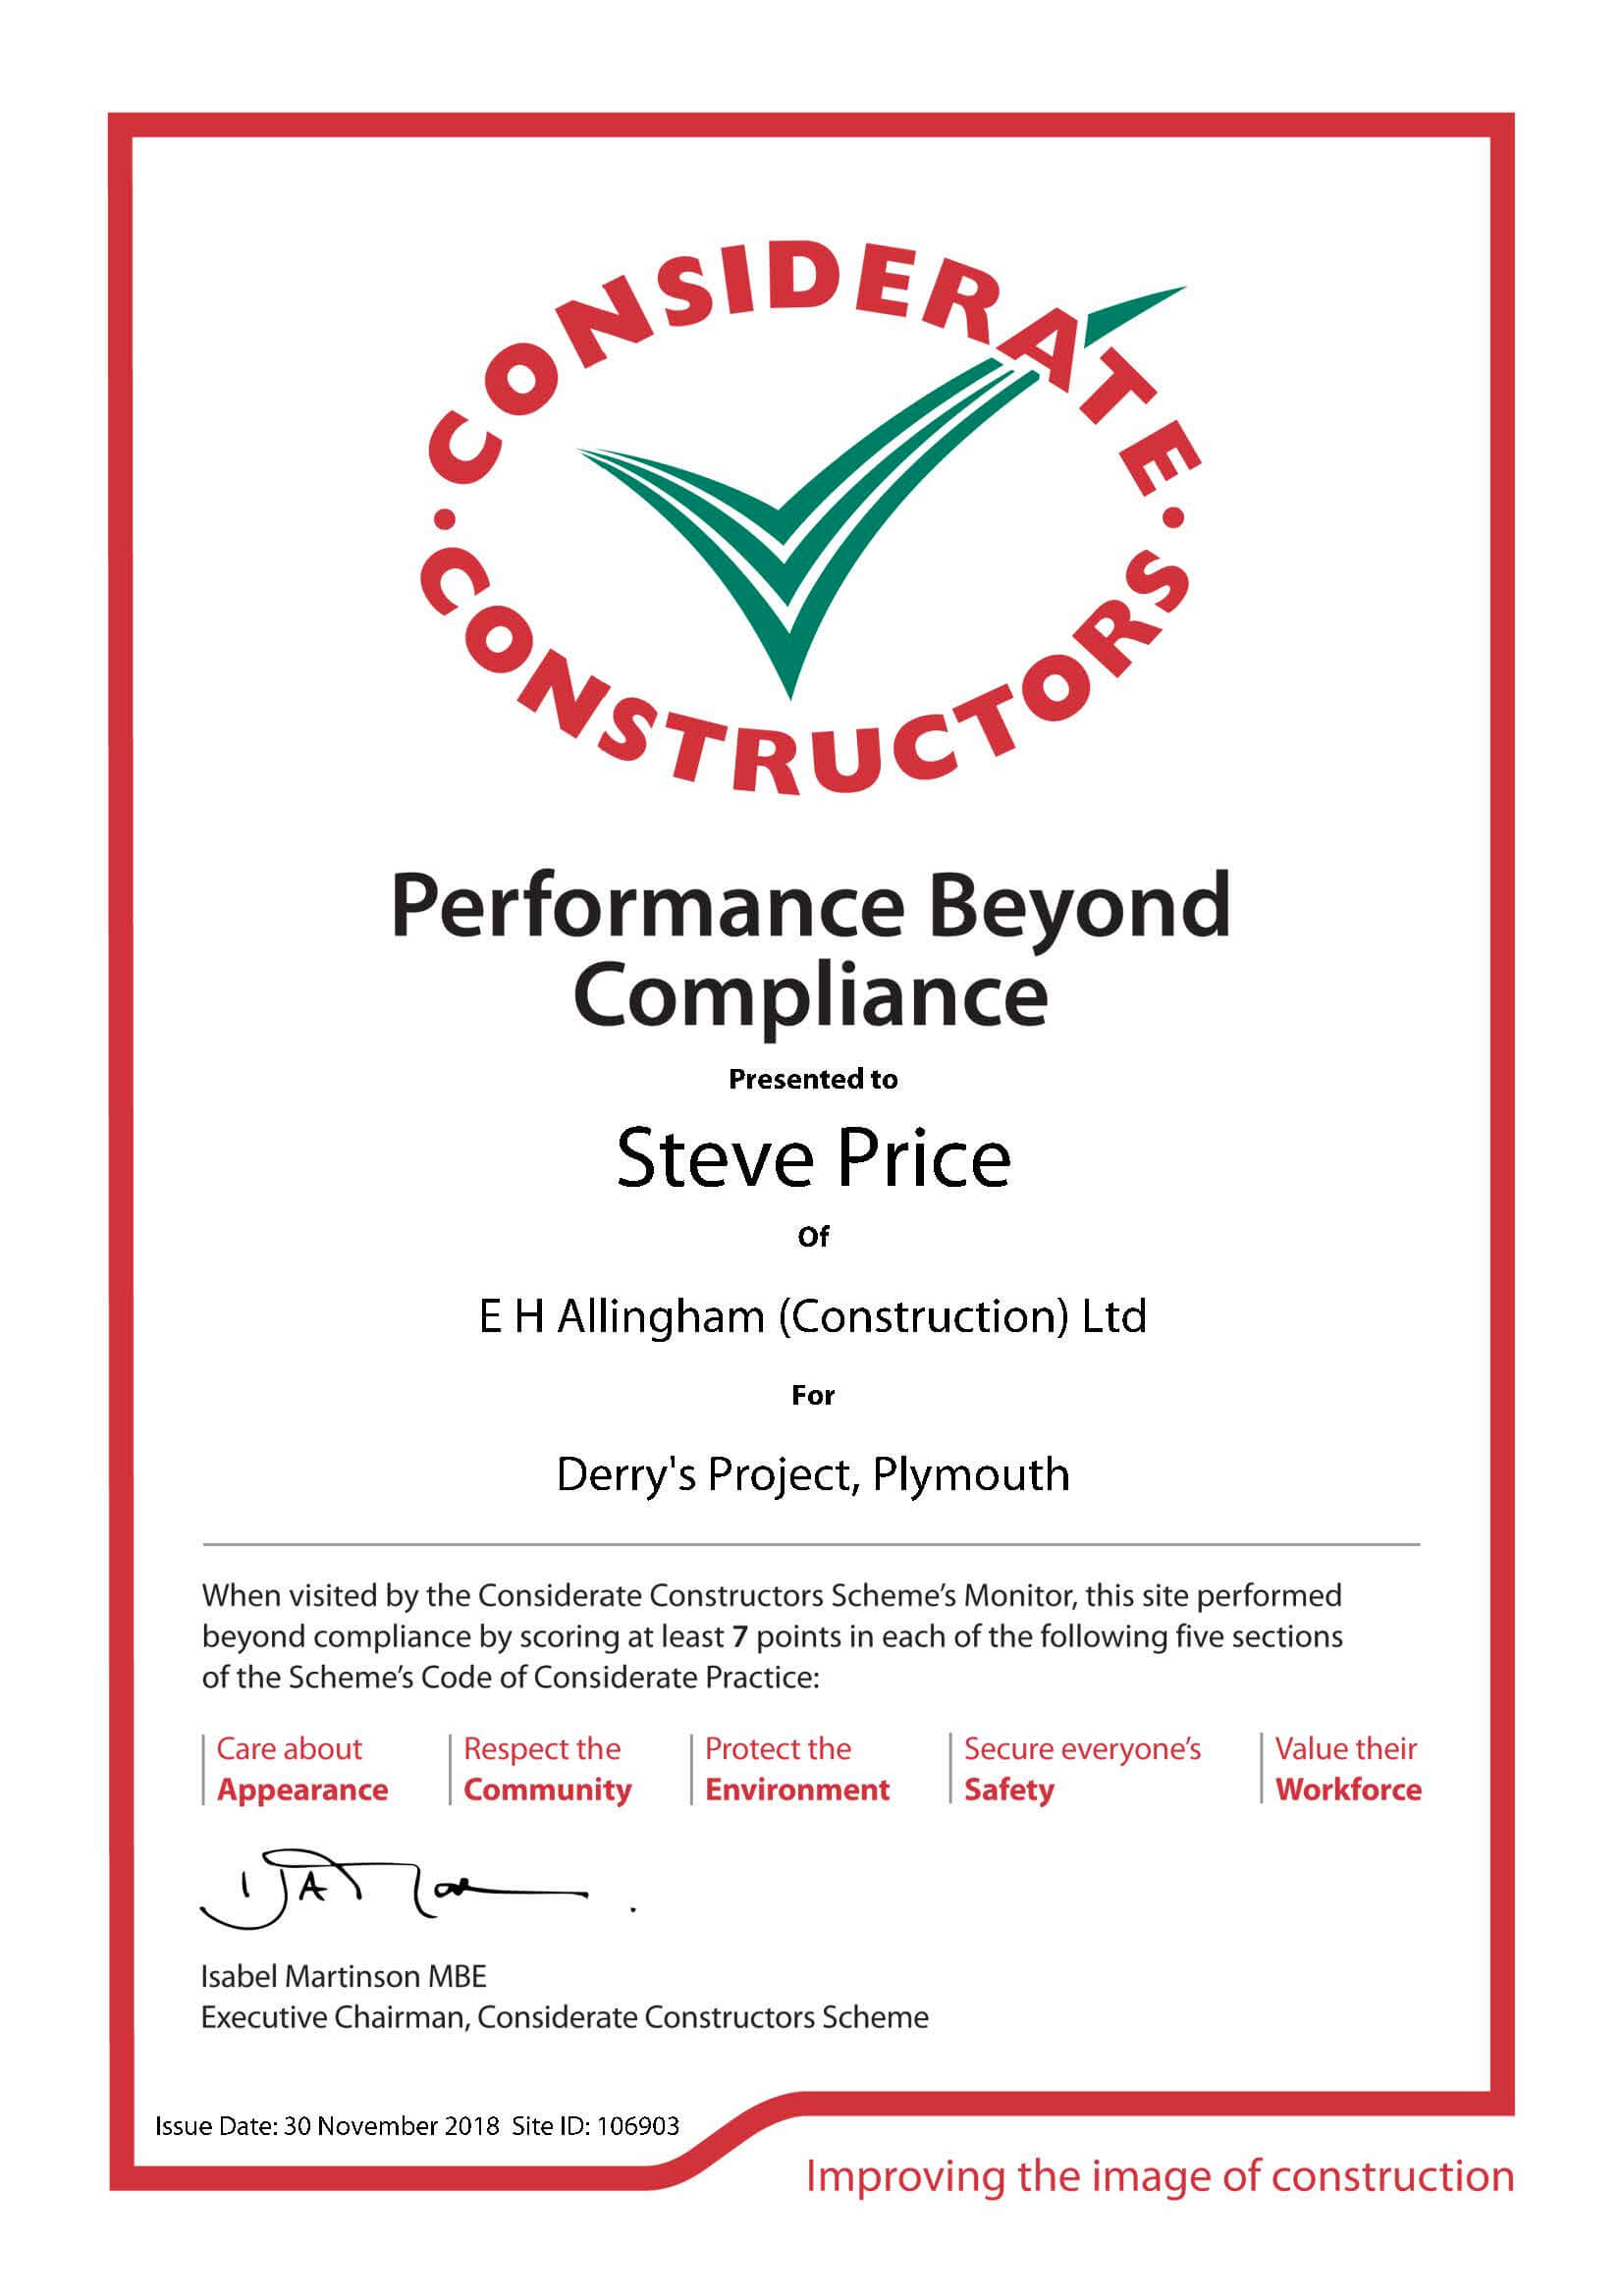 Performance Beyond Compliance Certificate 106903 - Plymouth CCS Visit